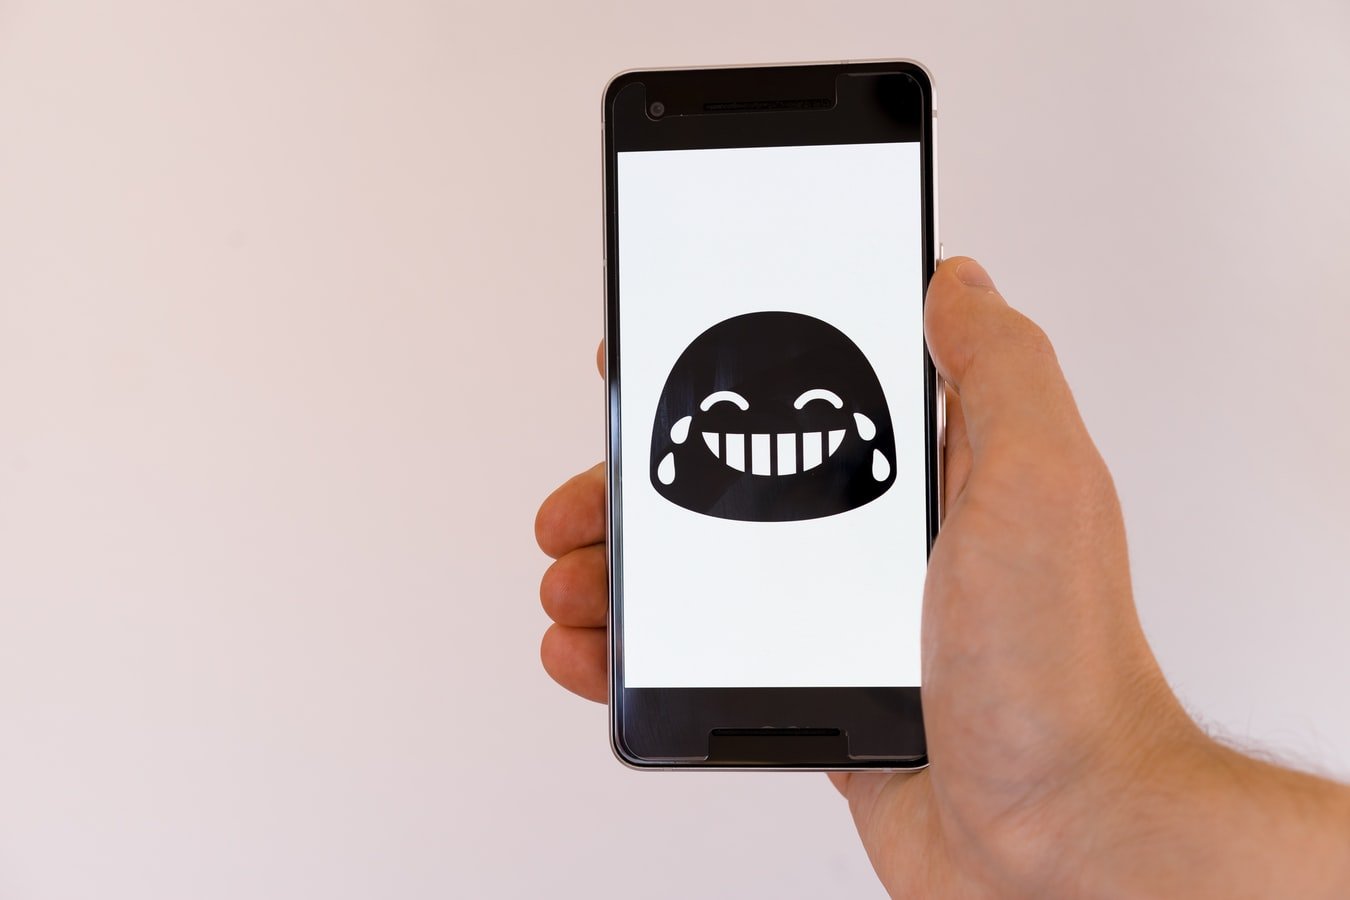 A laughing out loud emoji on a cell phone. | Photo: Unsplash/Markus Winkler